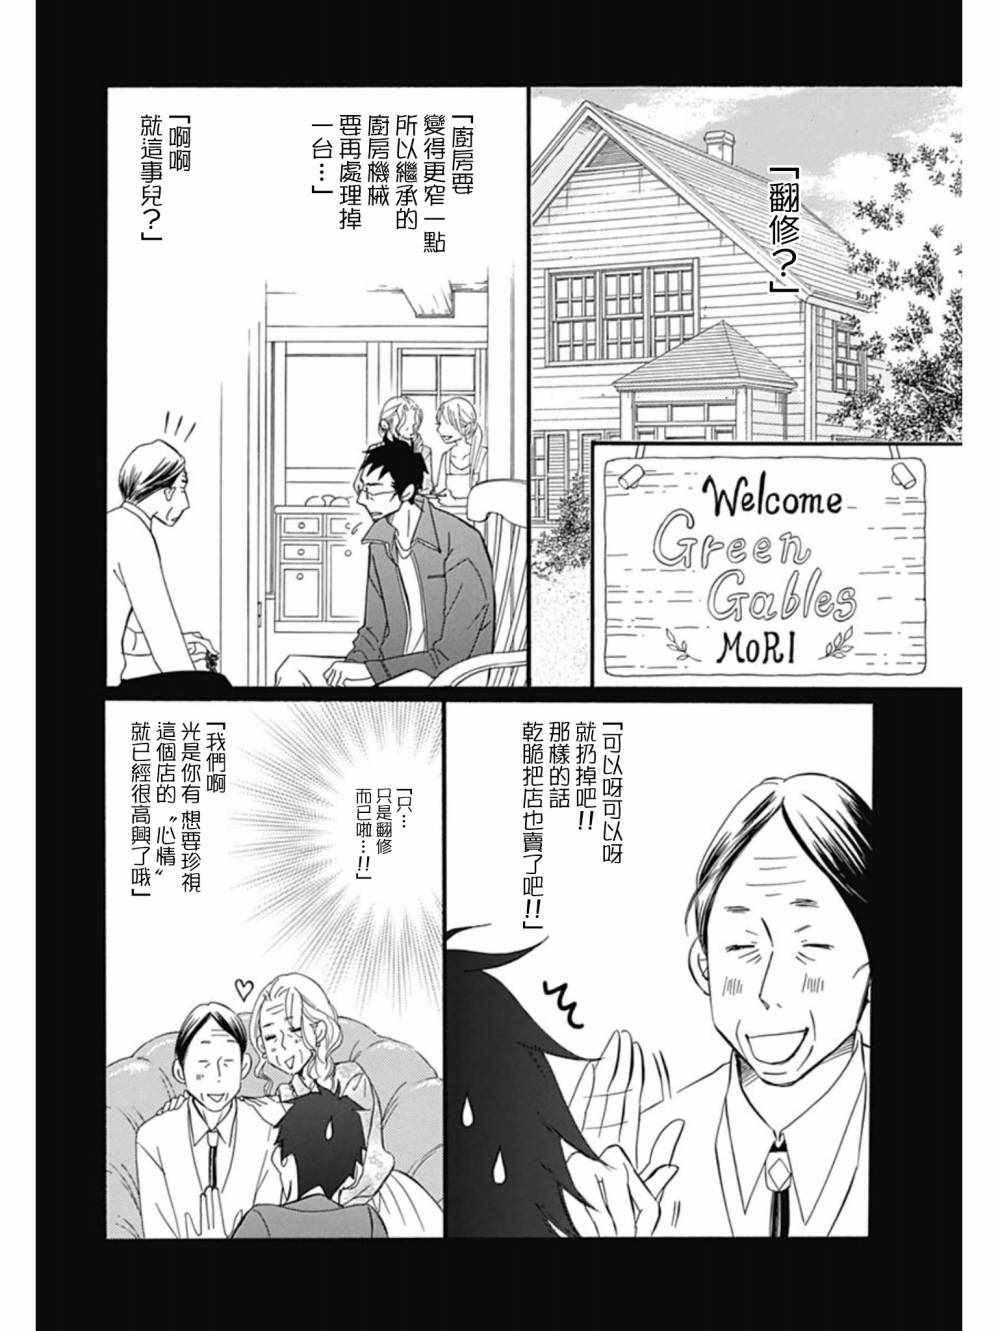 Bread&Butter - 第27話 - 5